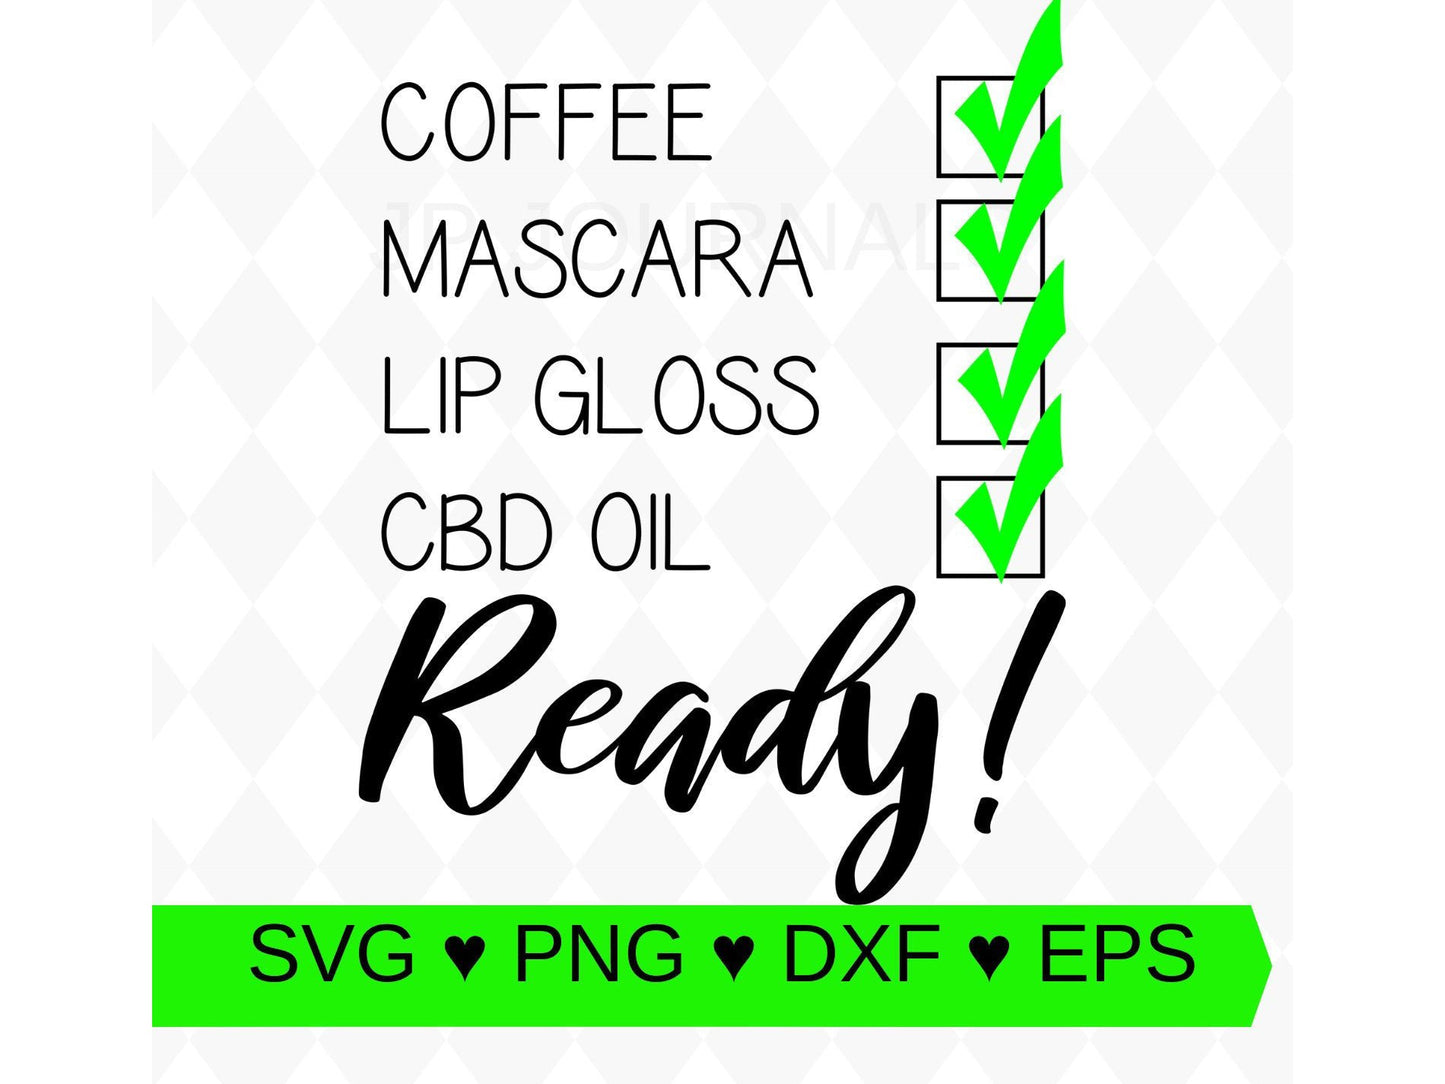 Ready Checklist (Coffee Mascara Lip Gloss CBD Oil) - svg png dxf eps Instant Download - Make Your Own Shirts,  Mugs, Gifts & More